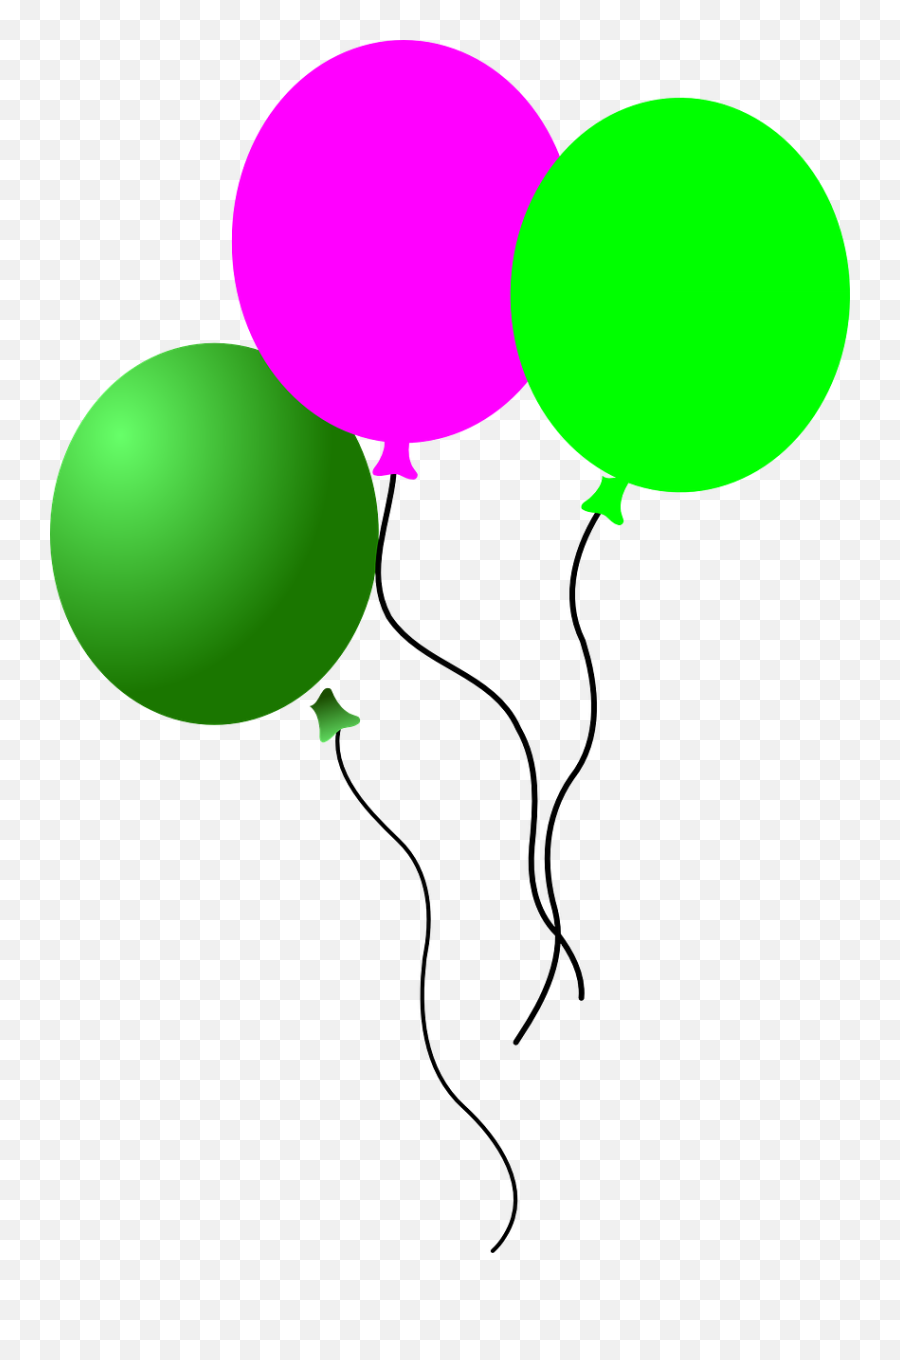 Balloons Pink Green Flying Birthday Party Festive - Balloons Birthday Green And Pink Emoji,Pink Balloons Png